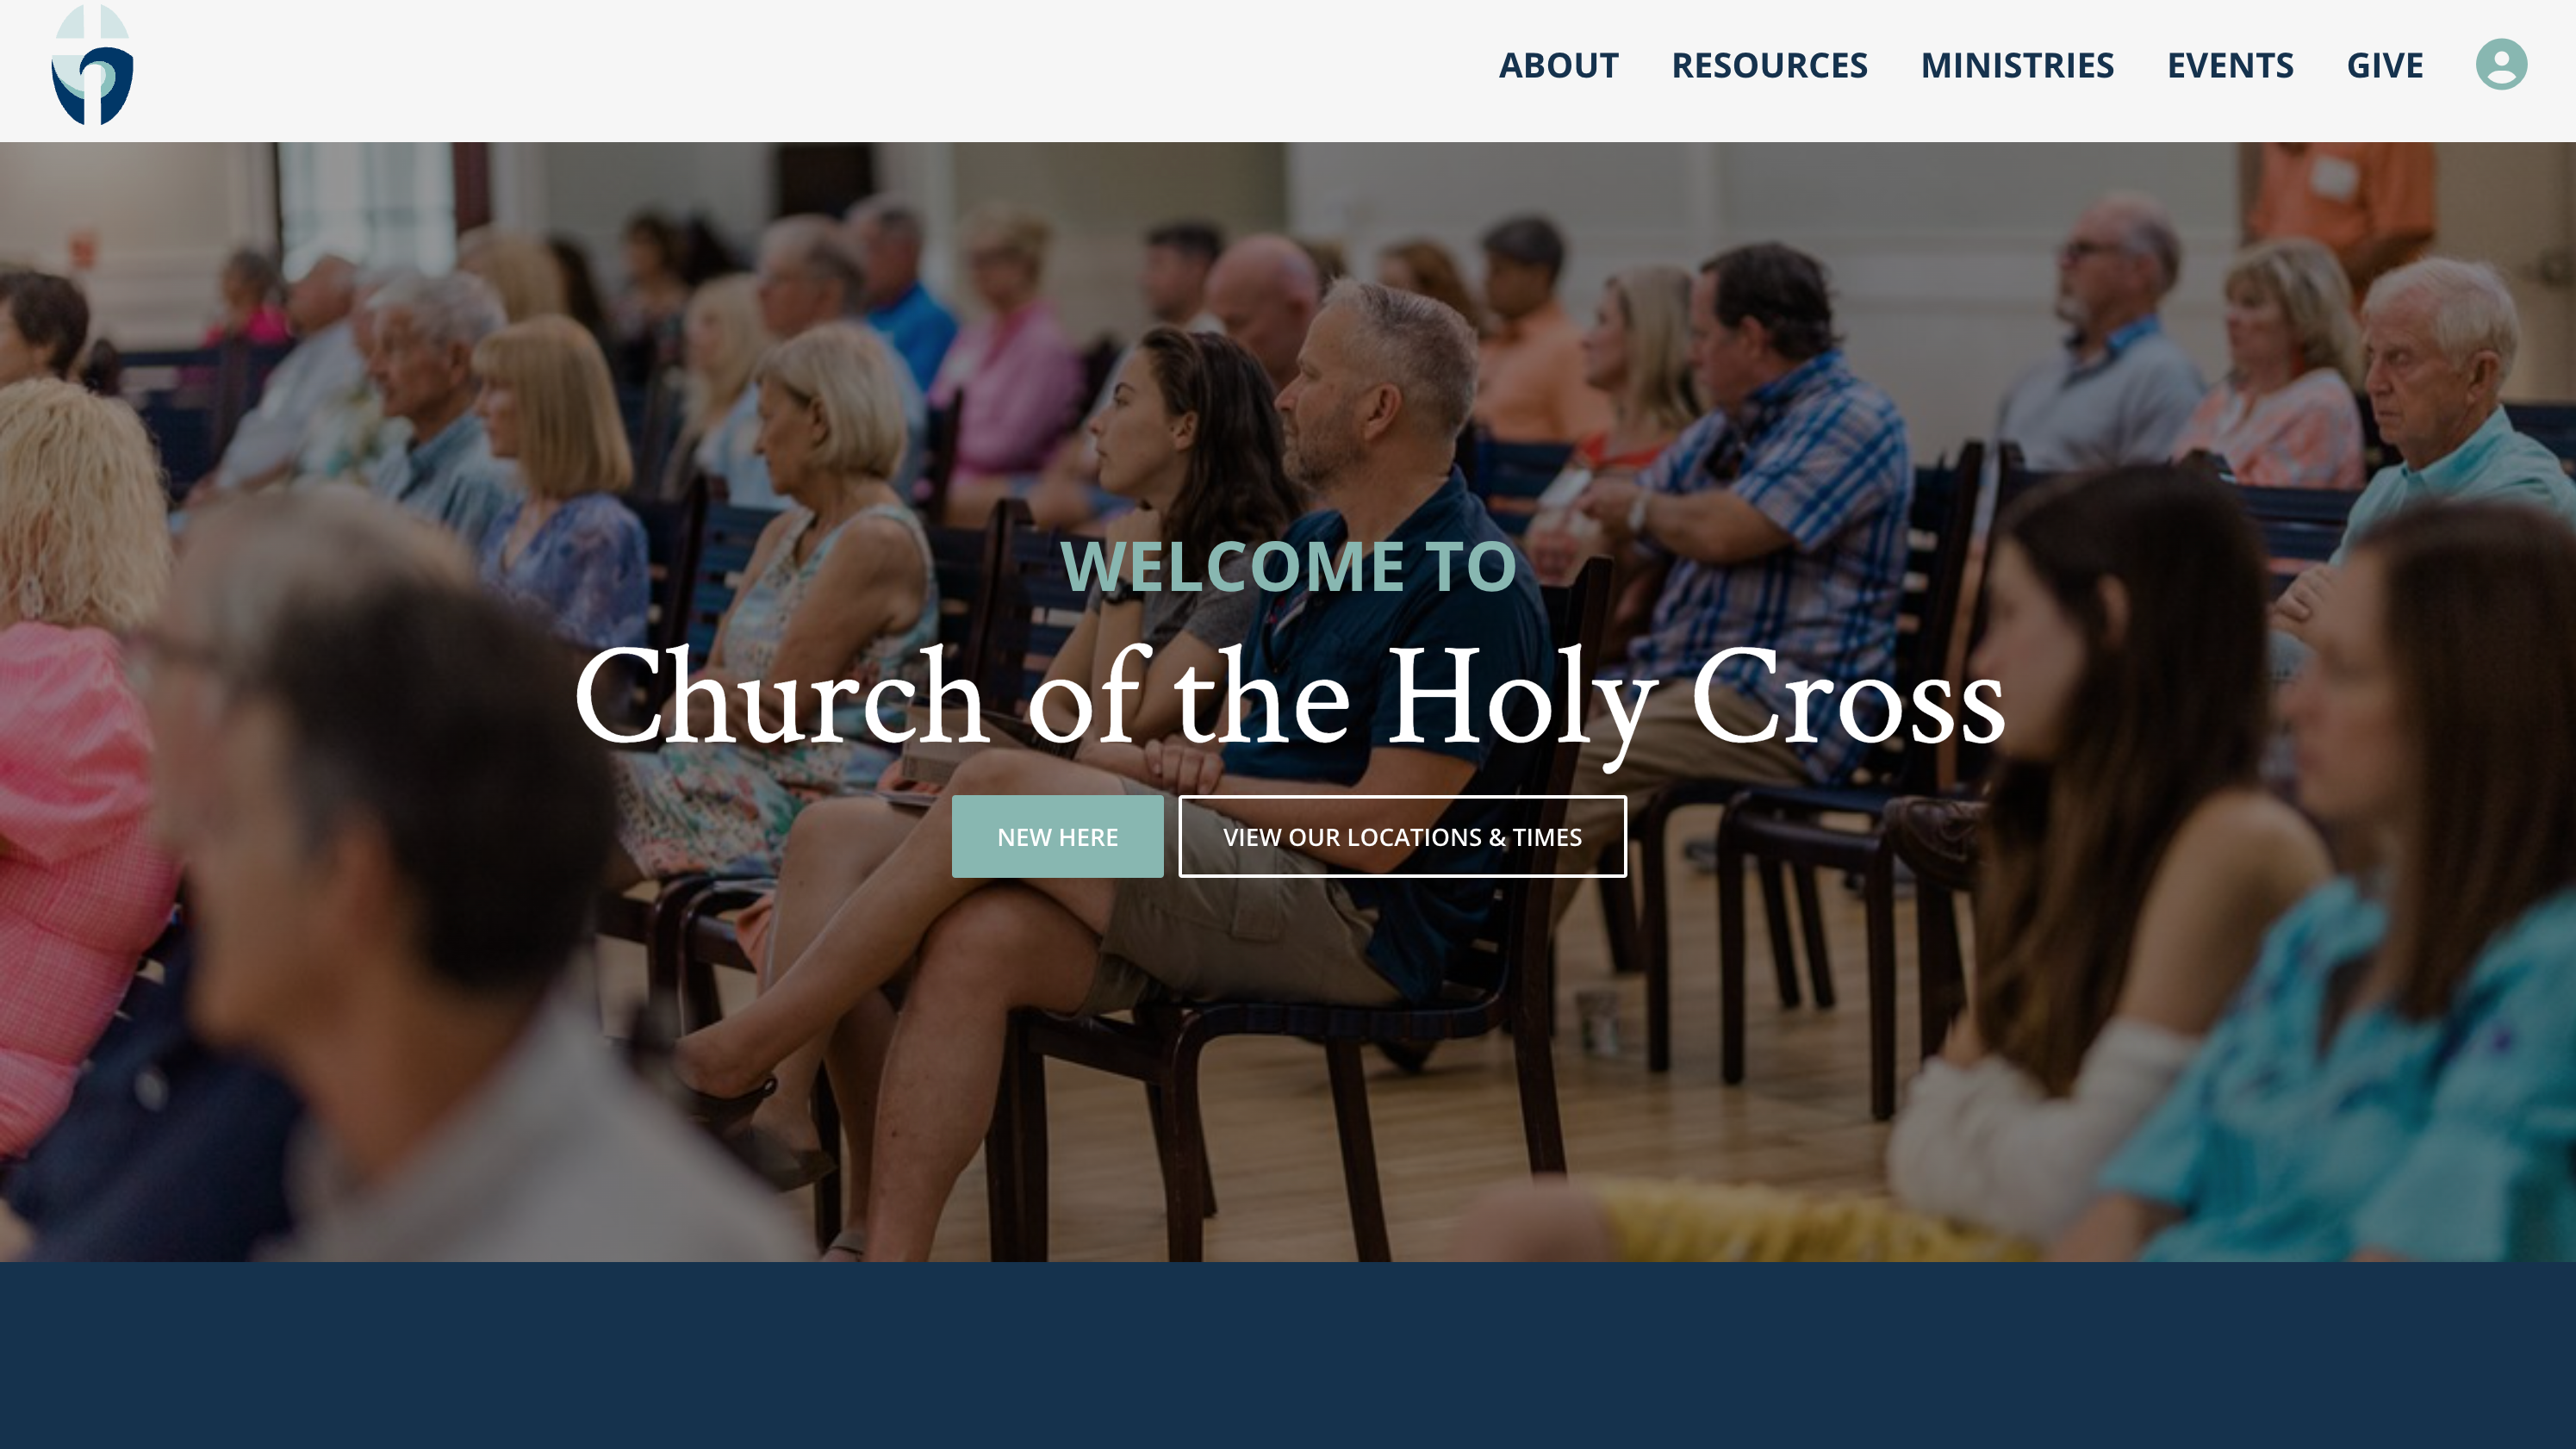 Website image from Church of the Holy Cross located in Daniel Island & Sullivan's Island, SC.